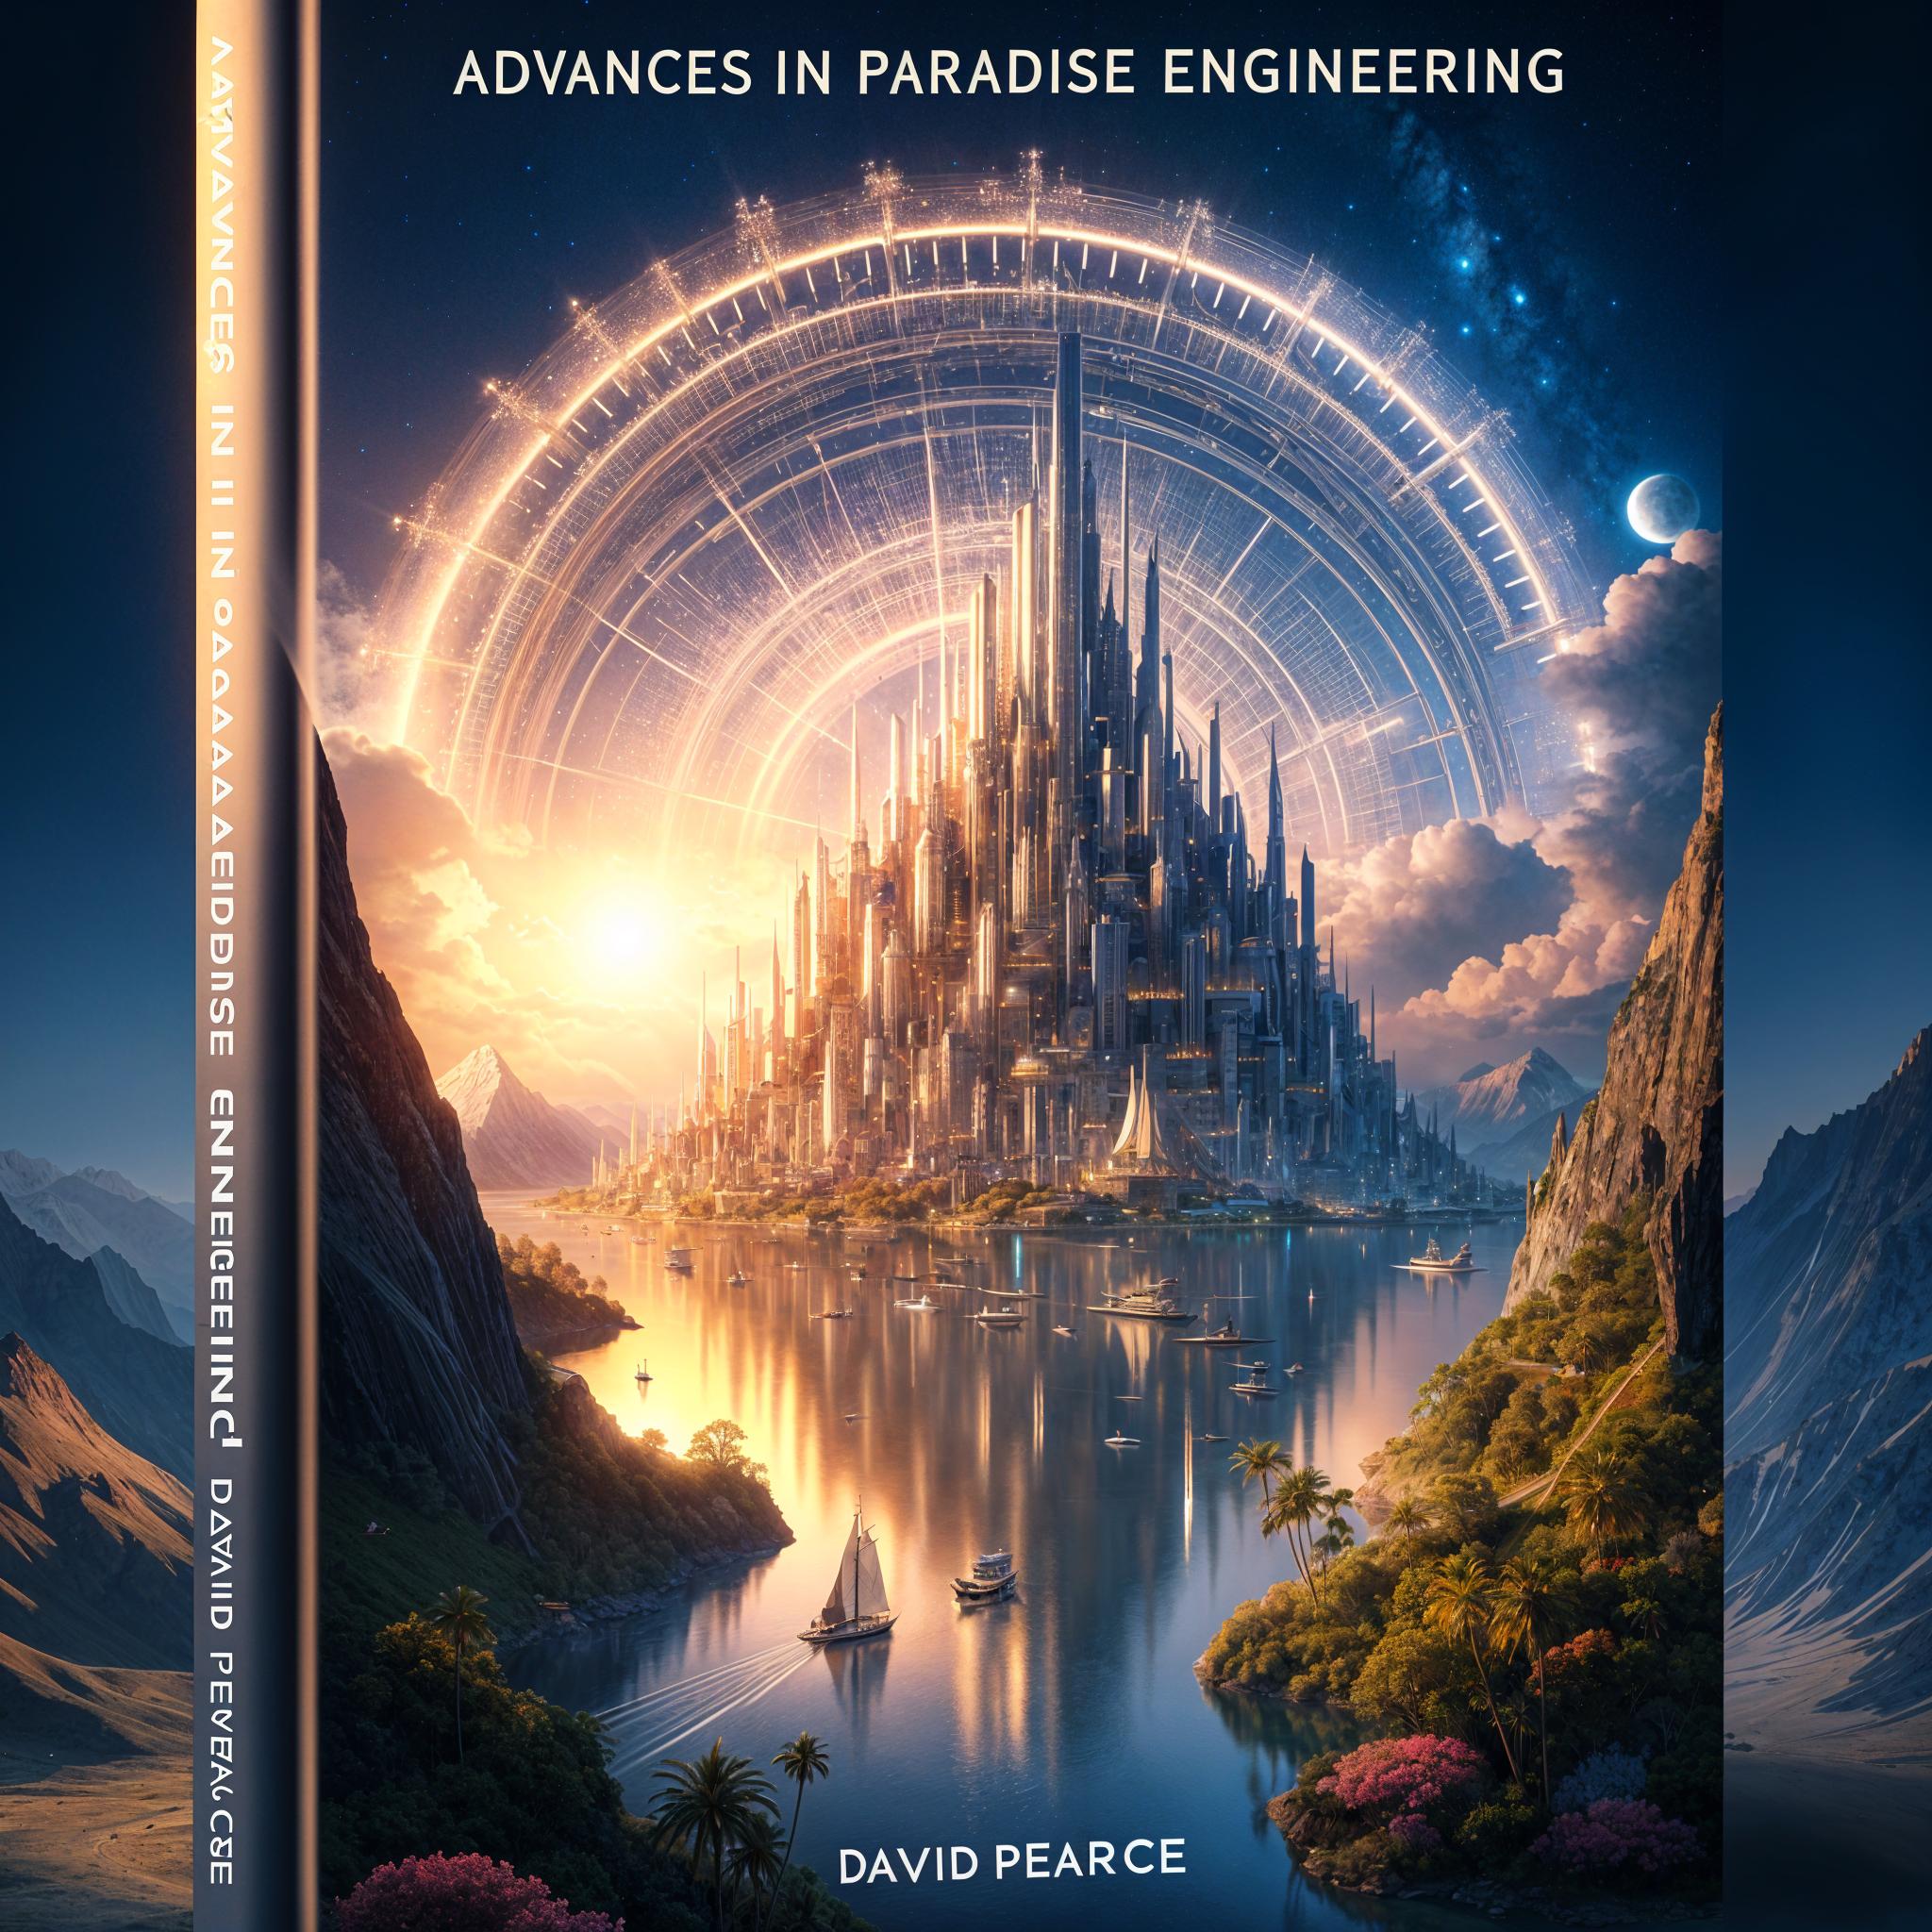 Advances in Paradise Engineering by David Pearce